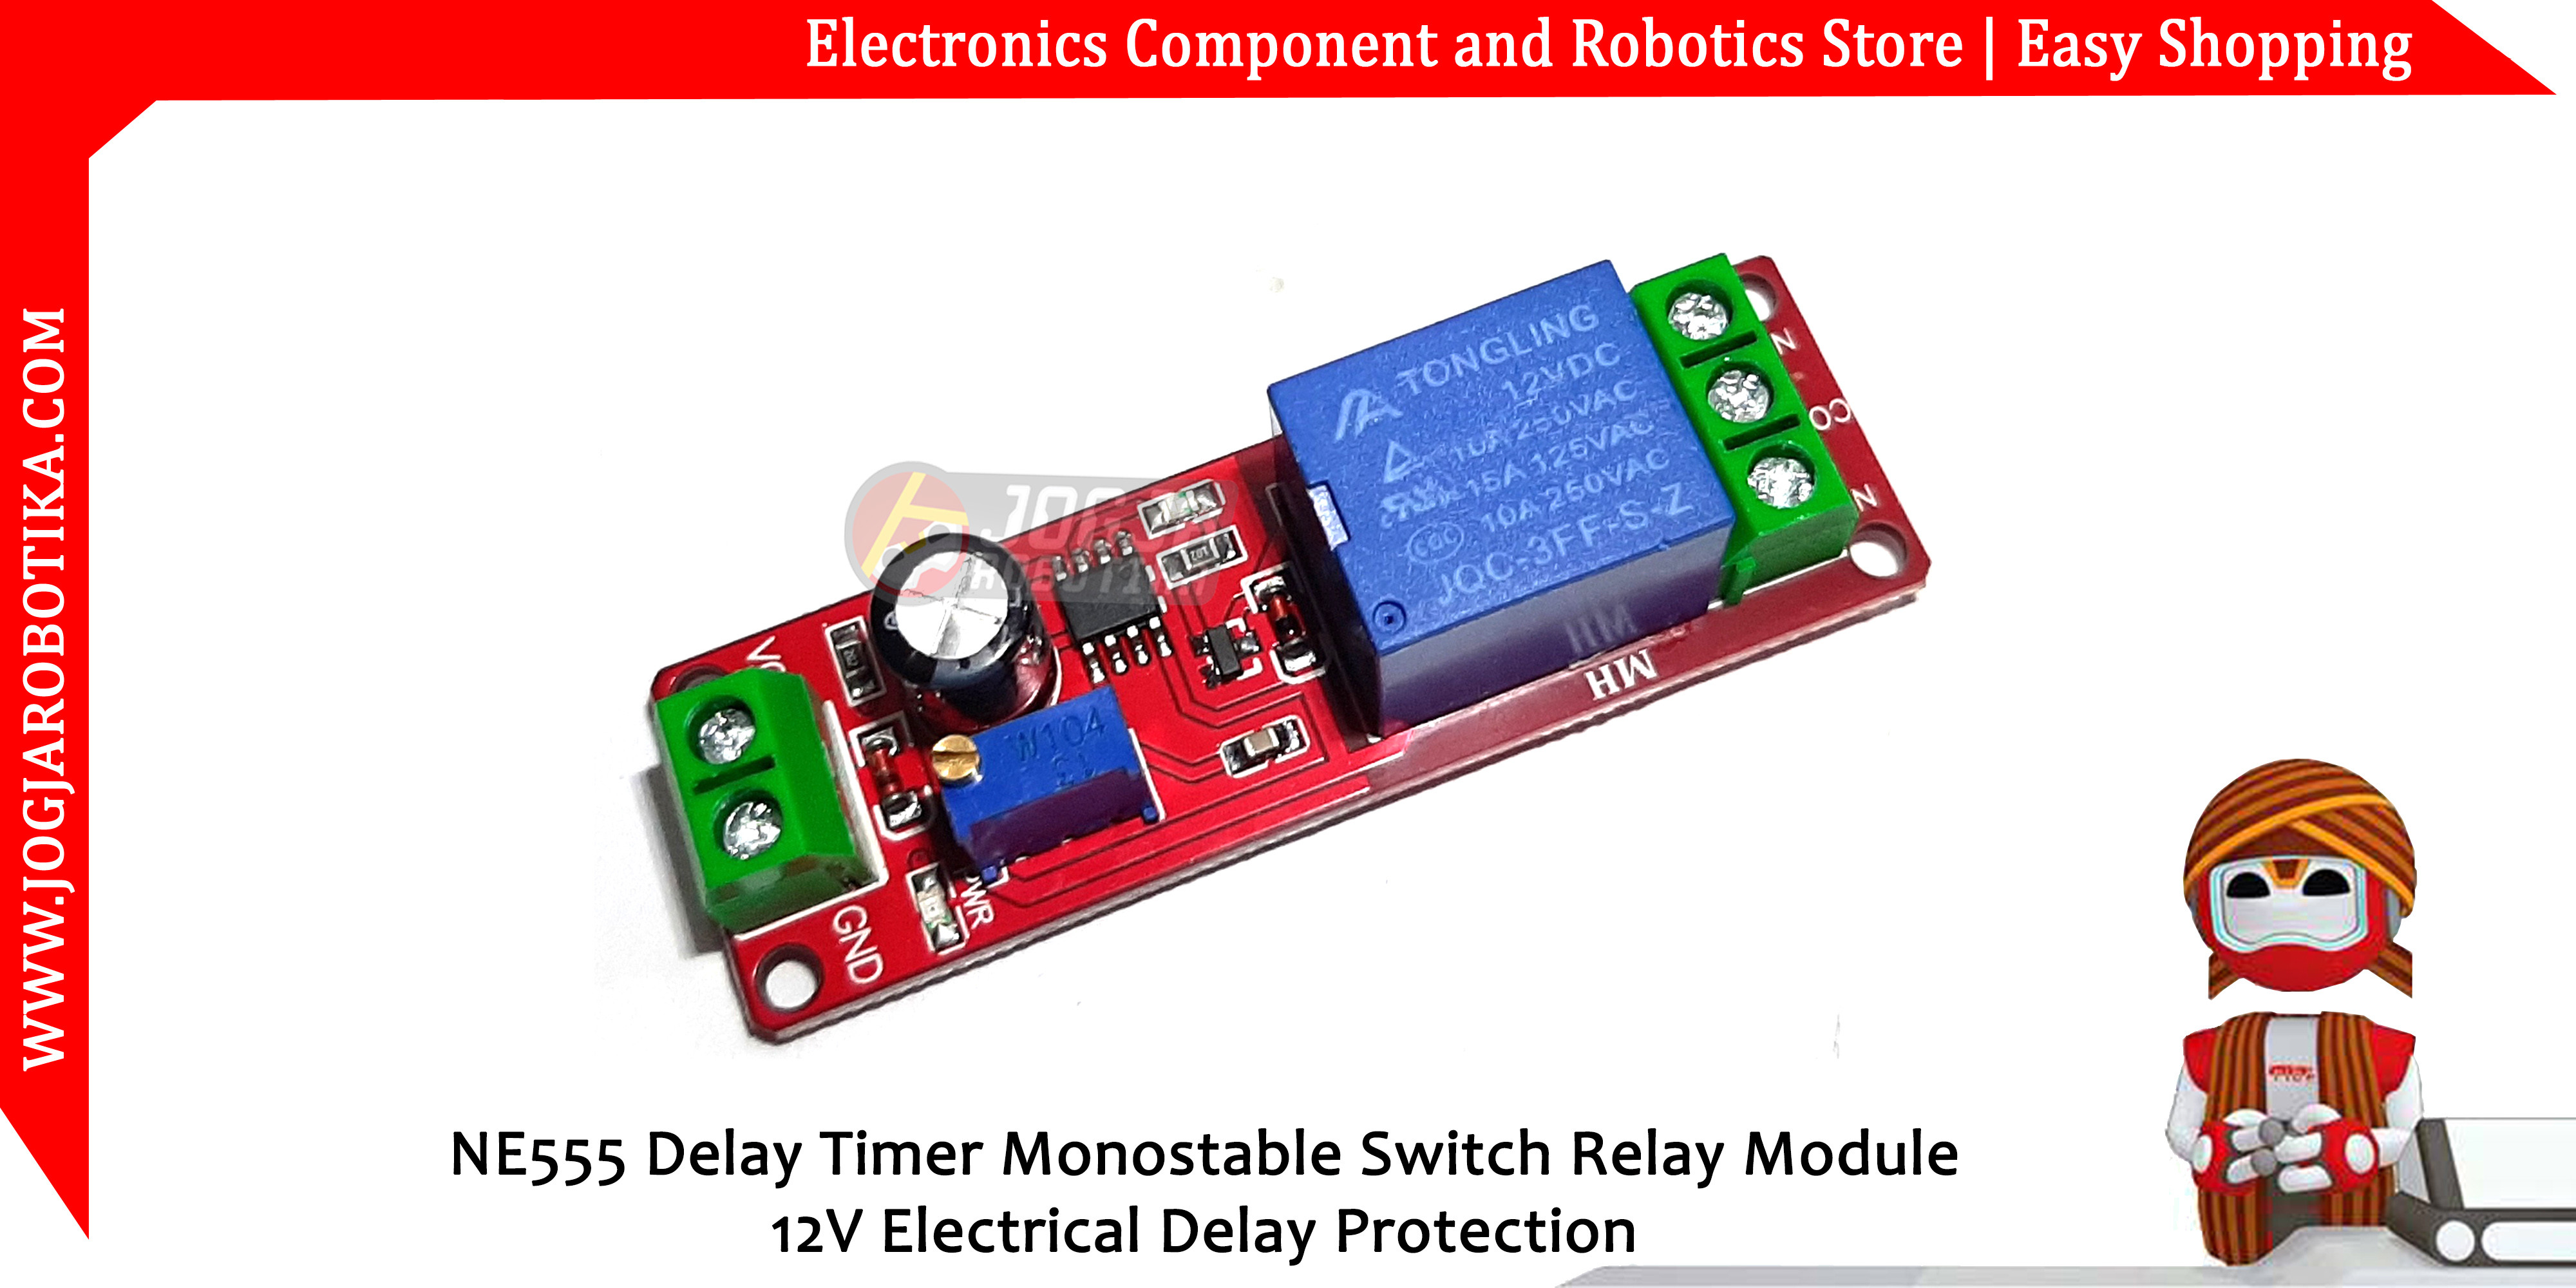 NE555 Delay Timer Monostable Switch Relay Module 12V Electrical